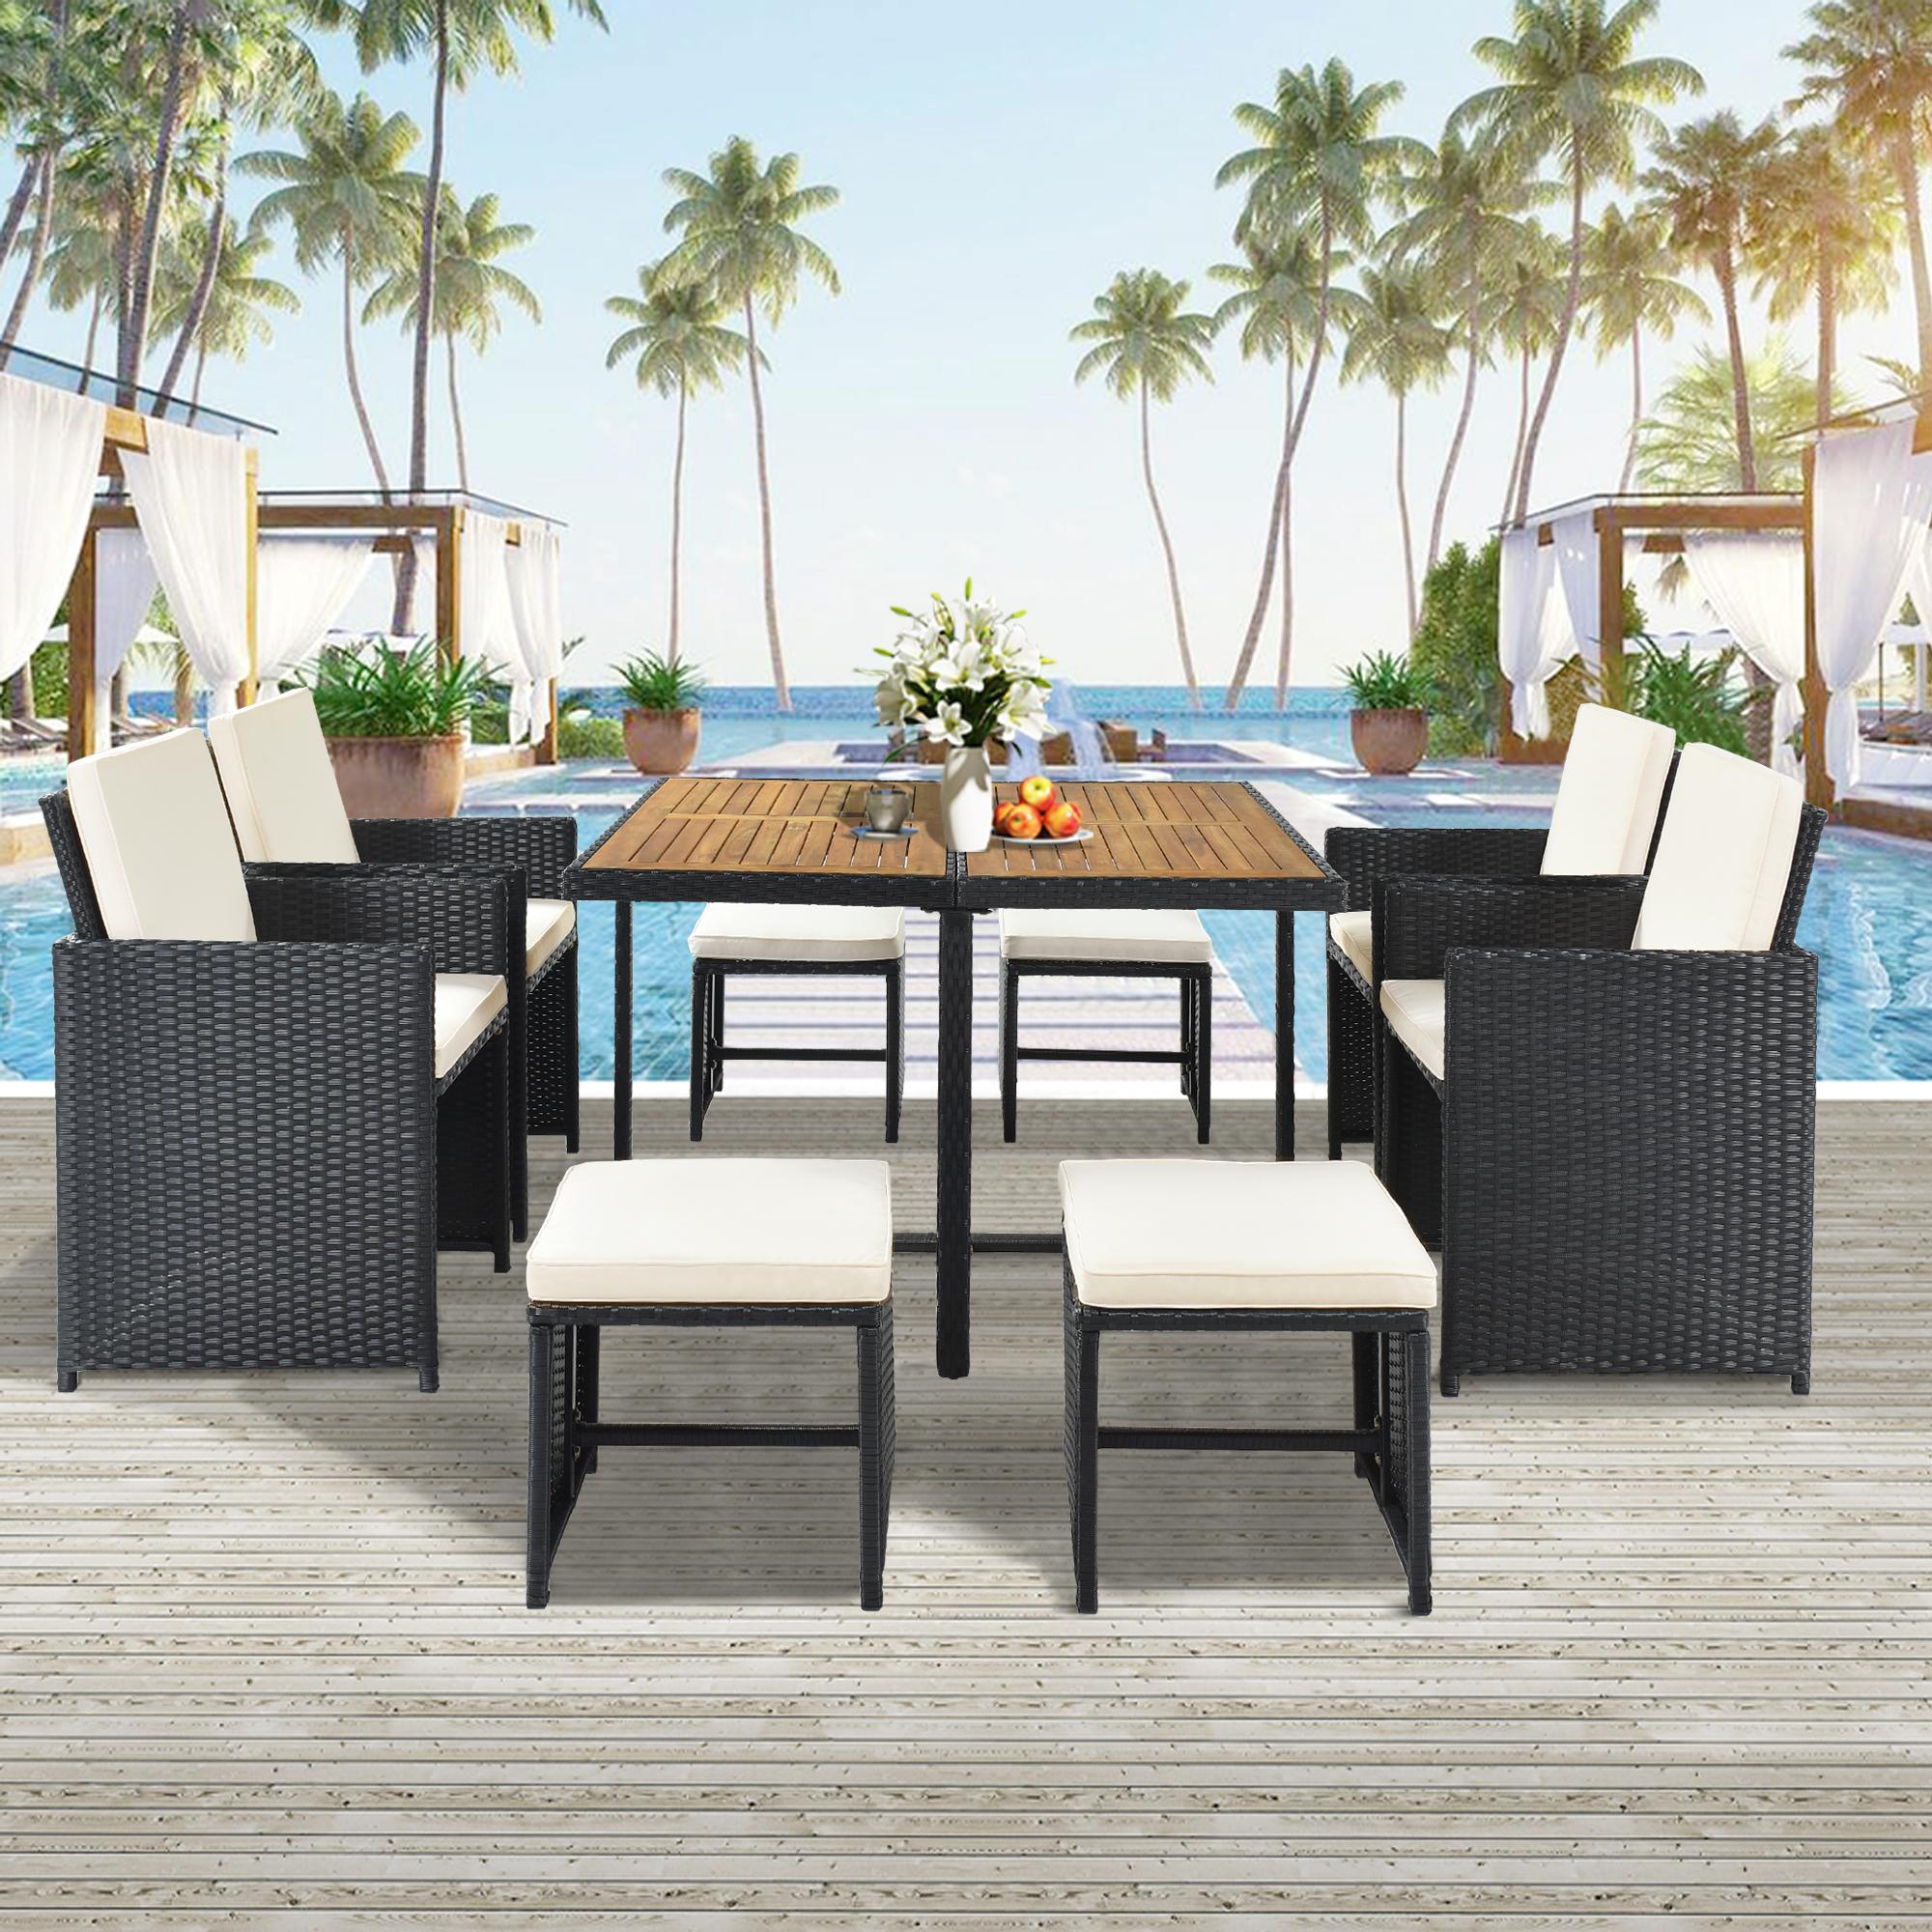 SEGMART 9 Piece Patio Dining Set, Outdoor Space Saving Rattan Chairs with Ottoman & Table, Outdoor Sectional Dining Table Set, PE Wicker Furniture Set for Patio Backyard Porch Garden Poolside, B1503 - image 2 of 10